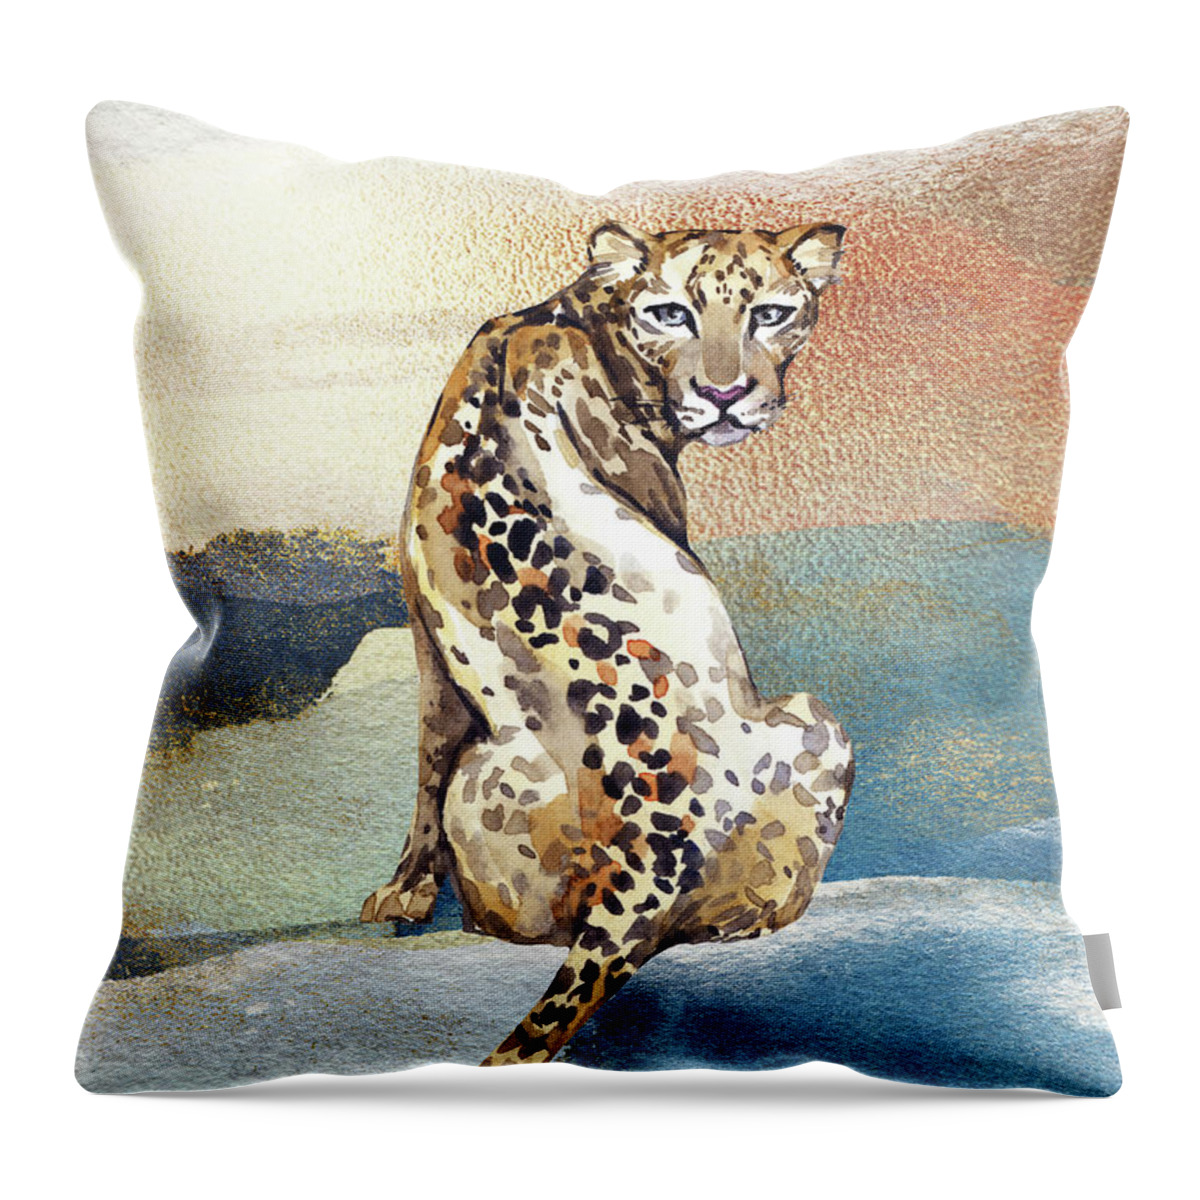 Leopard Throw Pillow featuring the painting Leopard Watercolor Animal Art Painting by Garden Of Delights